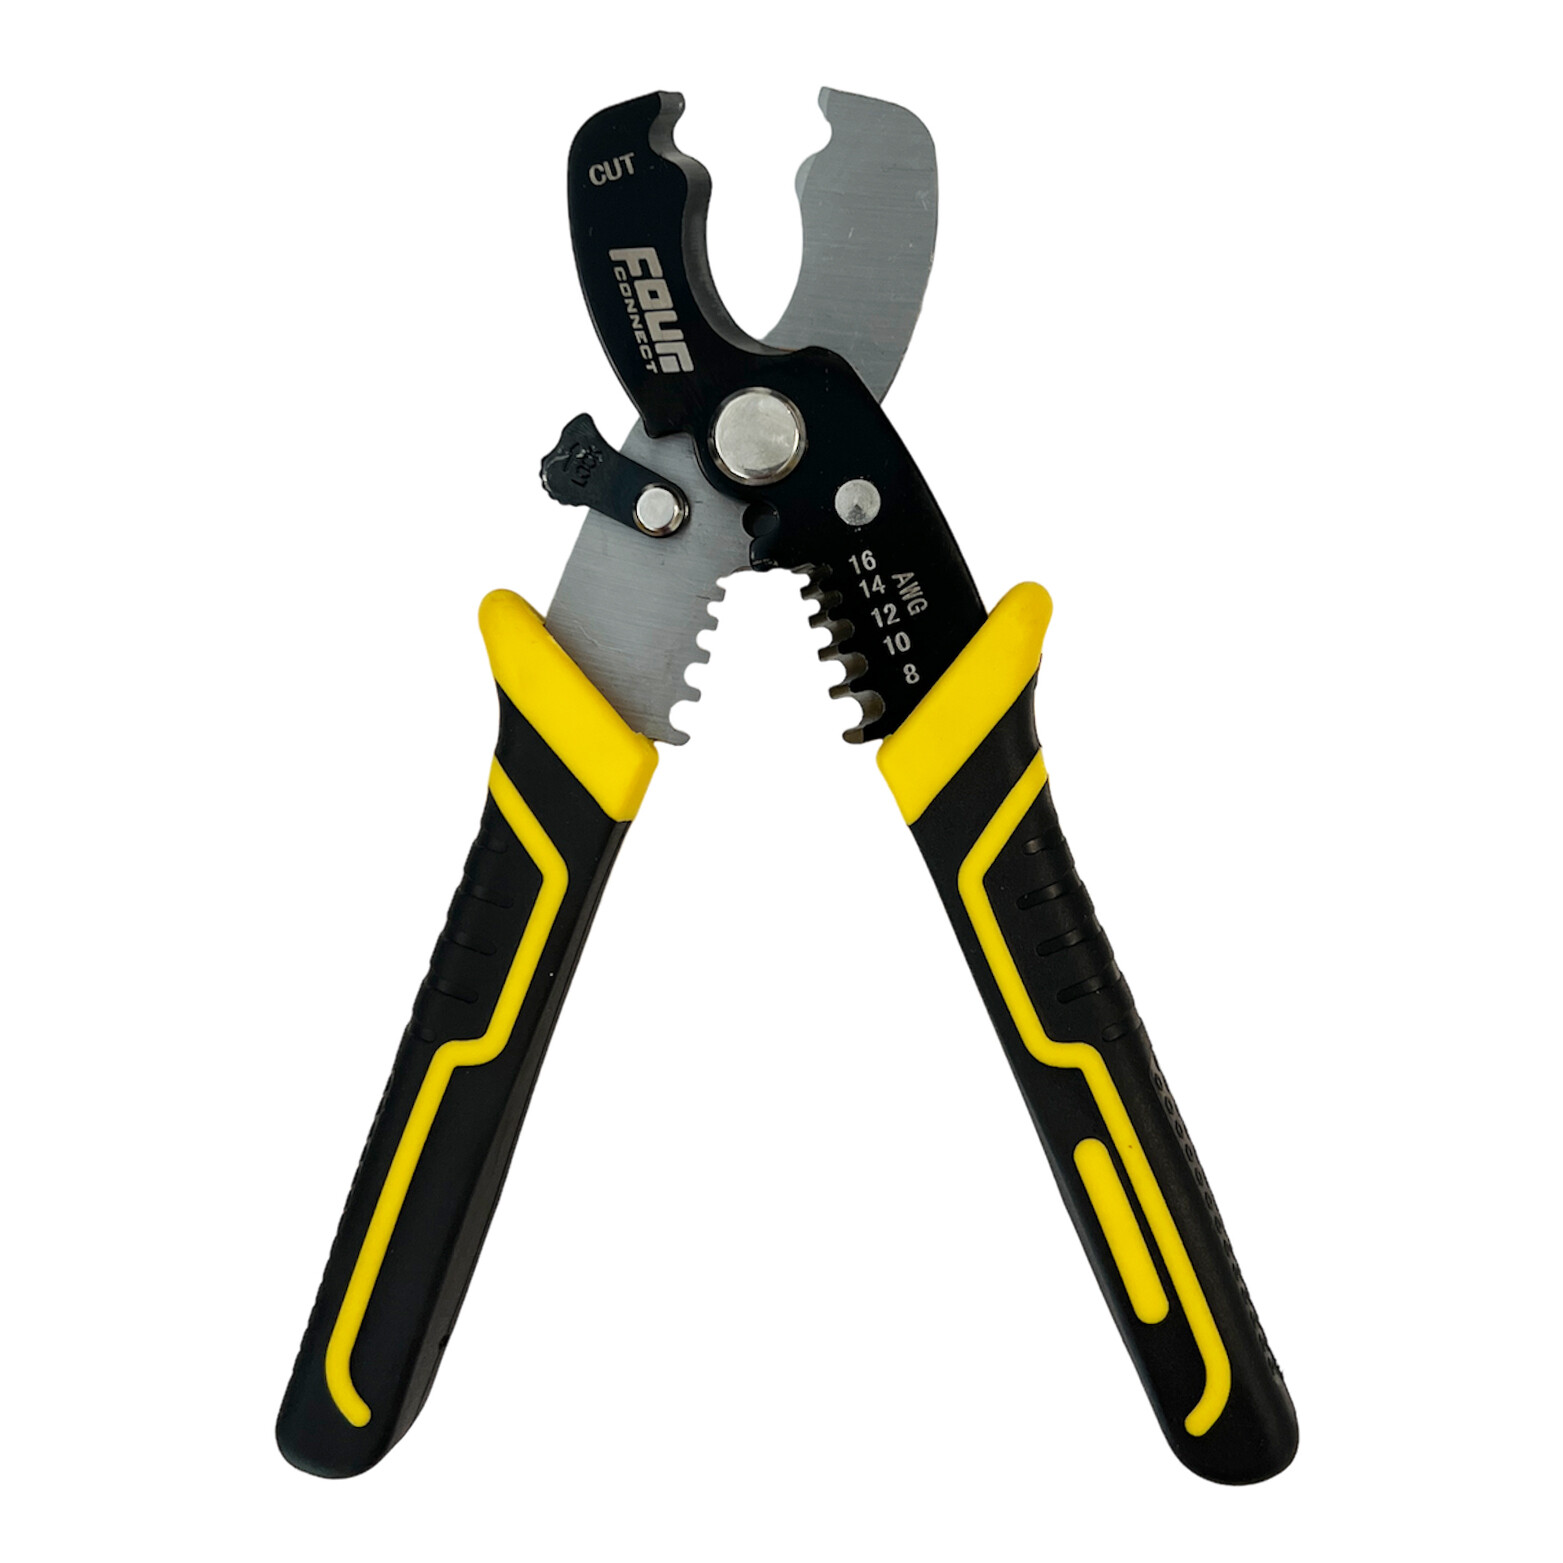 FOUR Connect 4-600119 cable cutter and stripper tool